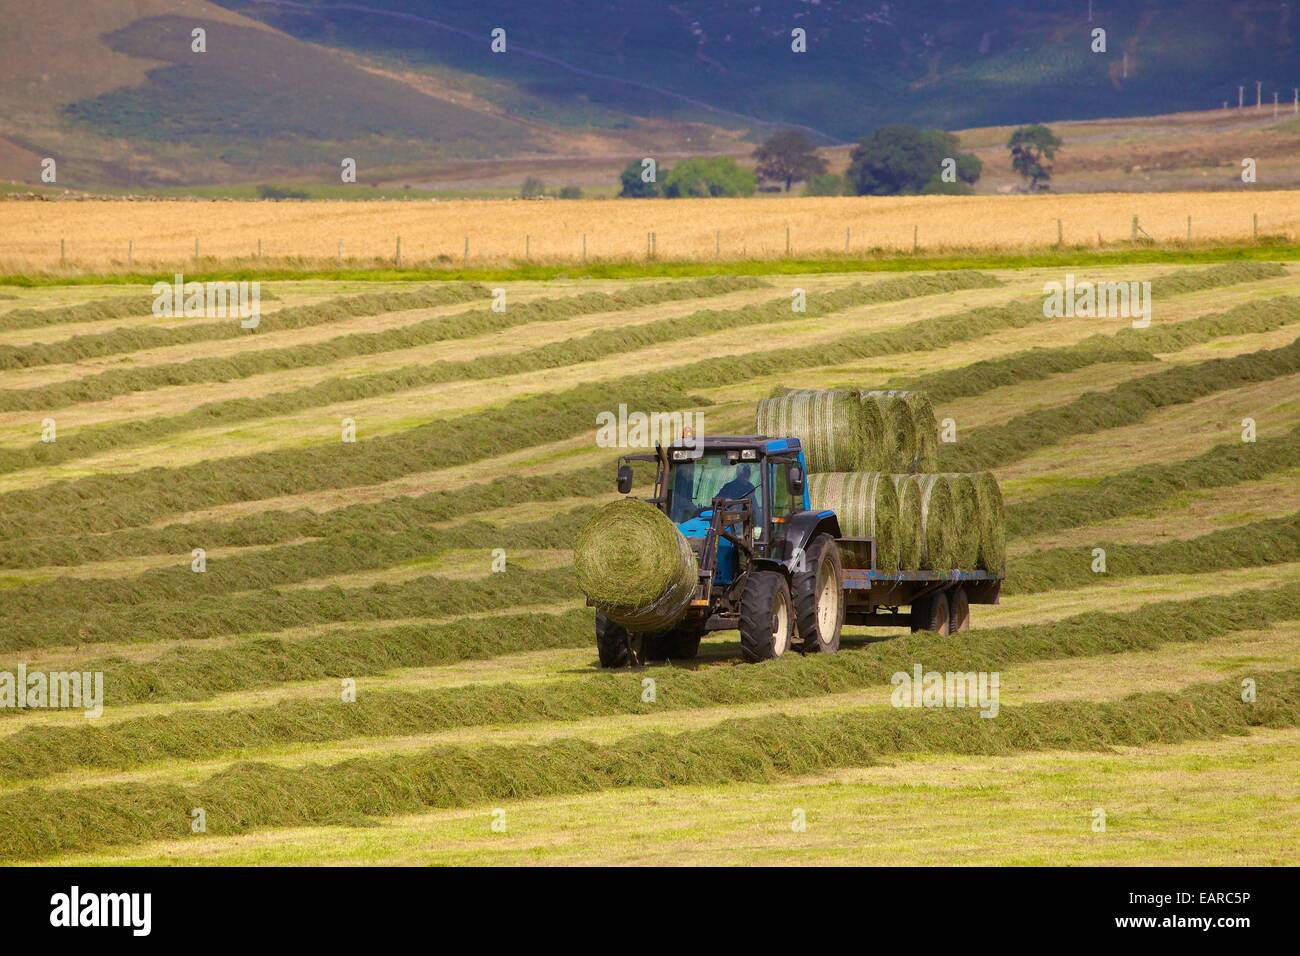 Tractor and trailer transporting hay bails. Eden Valley, Cumbria, England, UK. Stock Photo